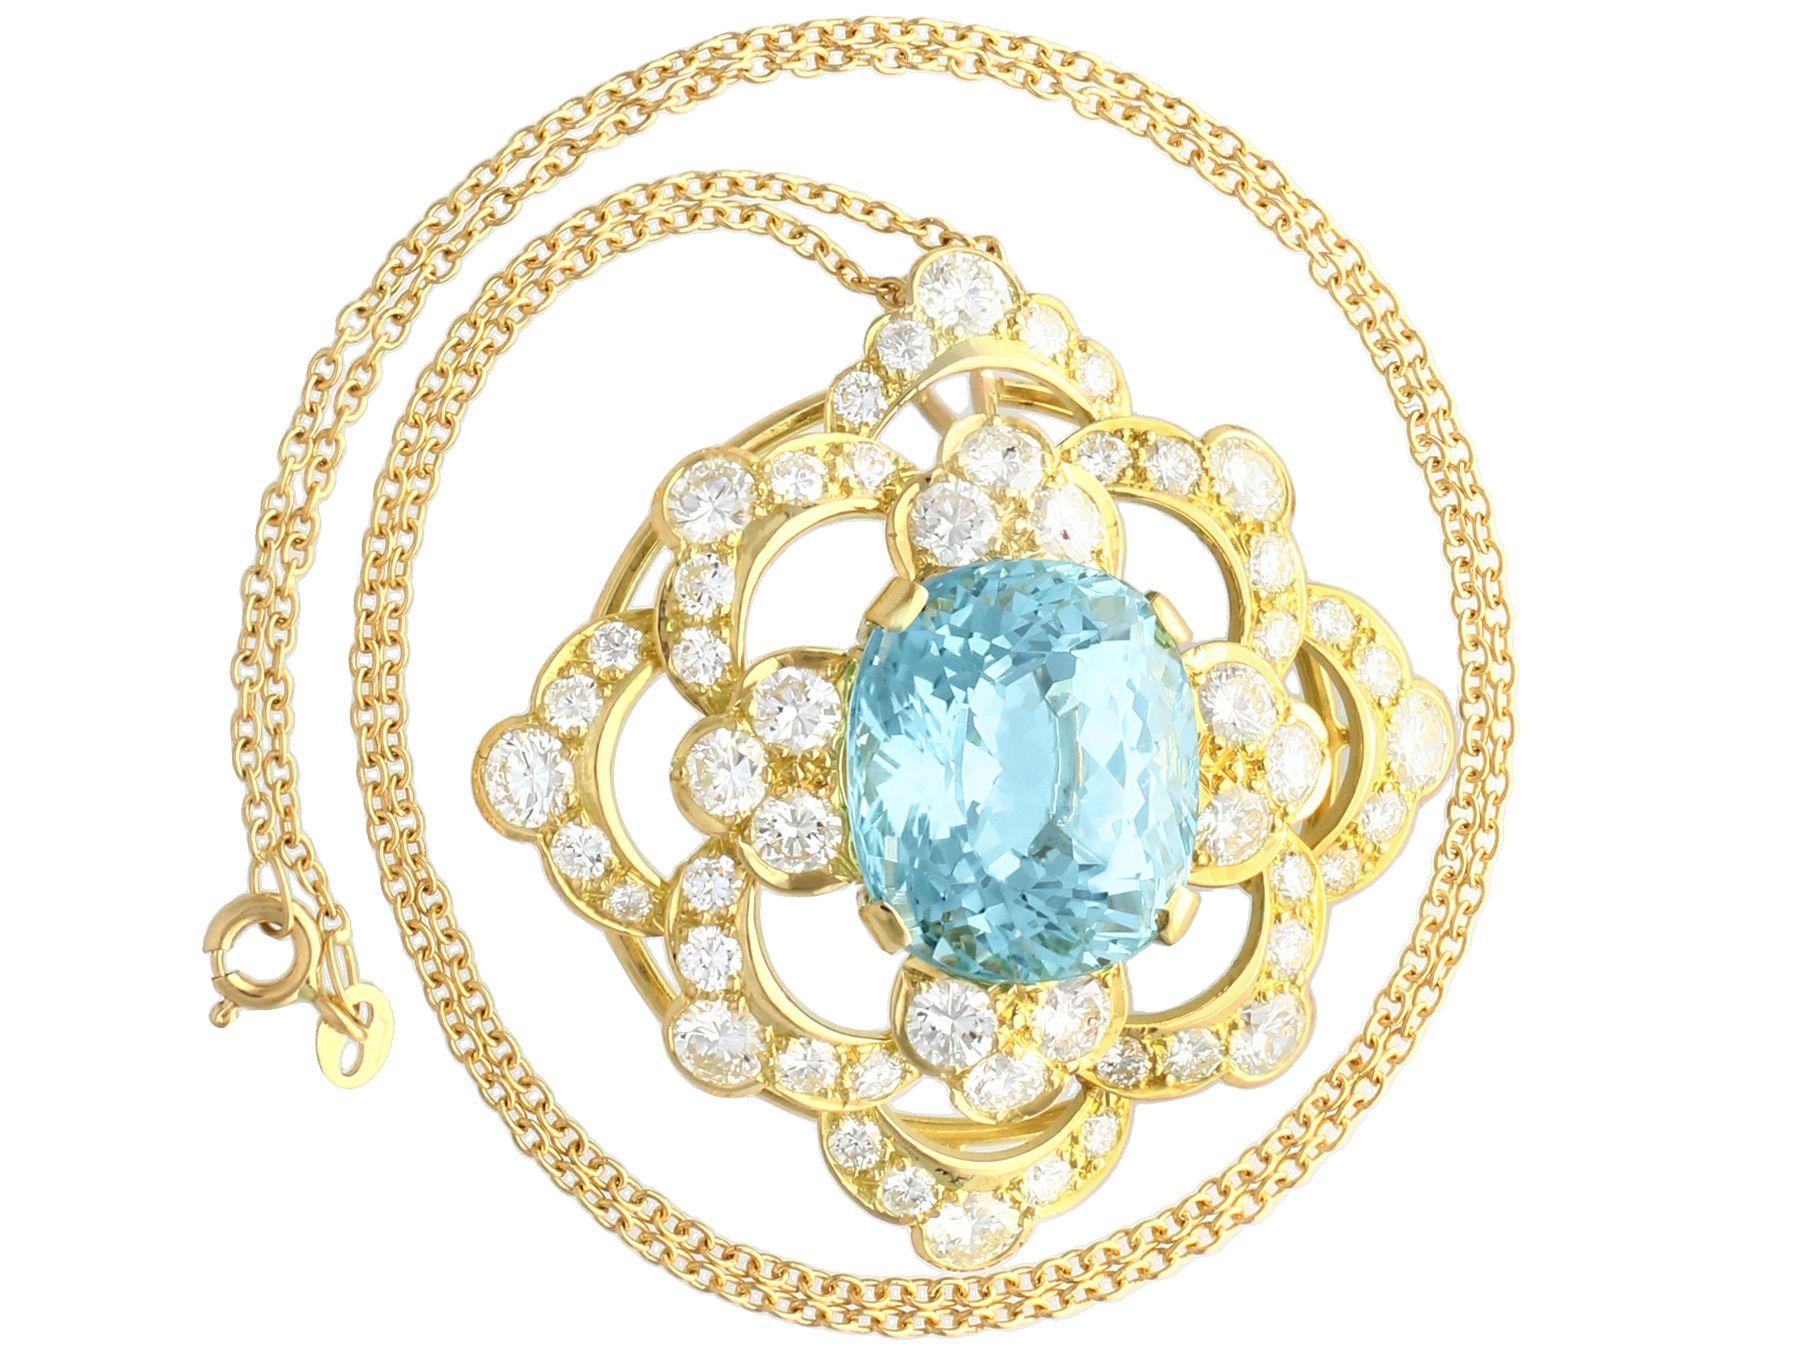 A stunning, fine and impressive vintage 22.32 carat aquamarine, 7.62 carat diamond and 18k yellow gold necklace; part of our diverse vintage jewelry and estate jewelry collections.

This stunning, fine and impressive, large gold aquamarine pendant